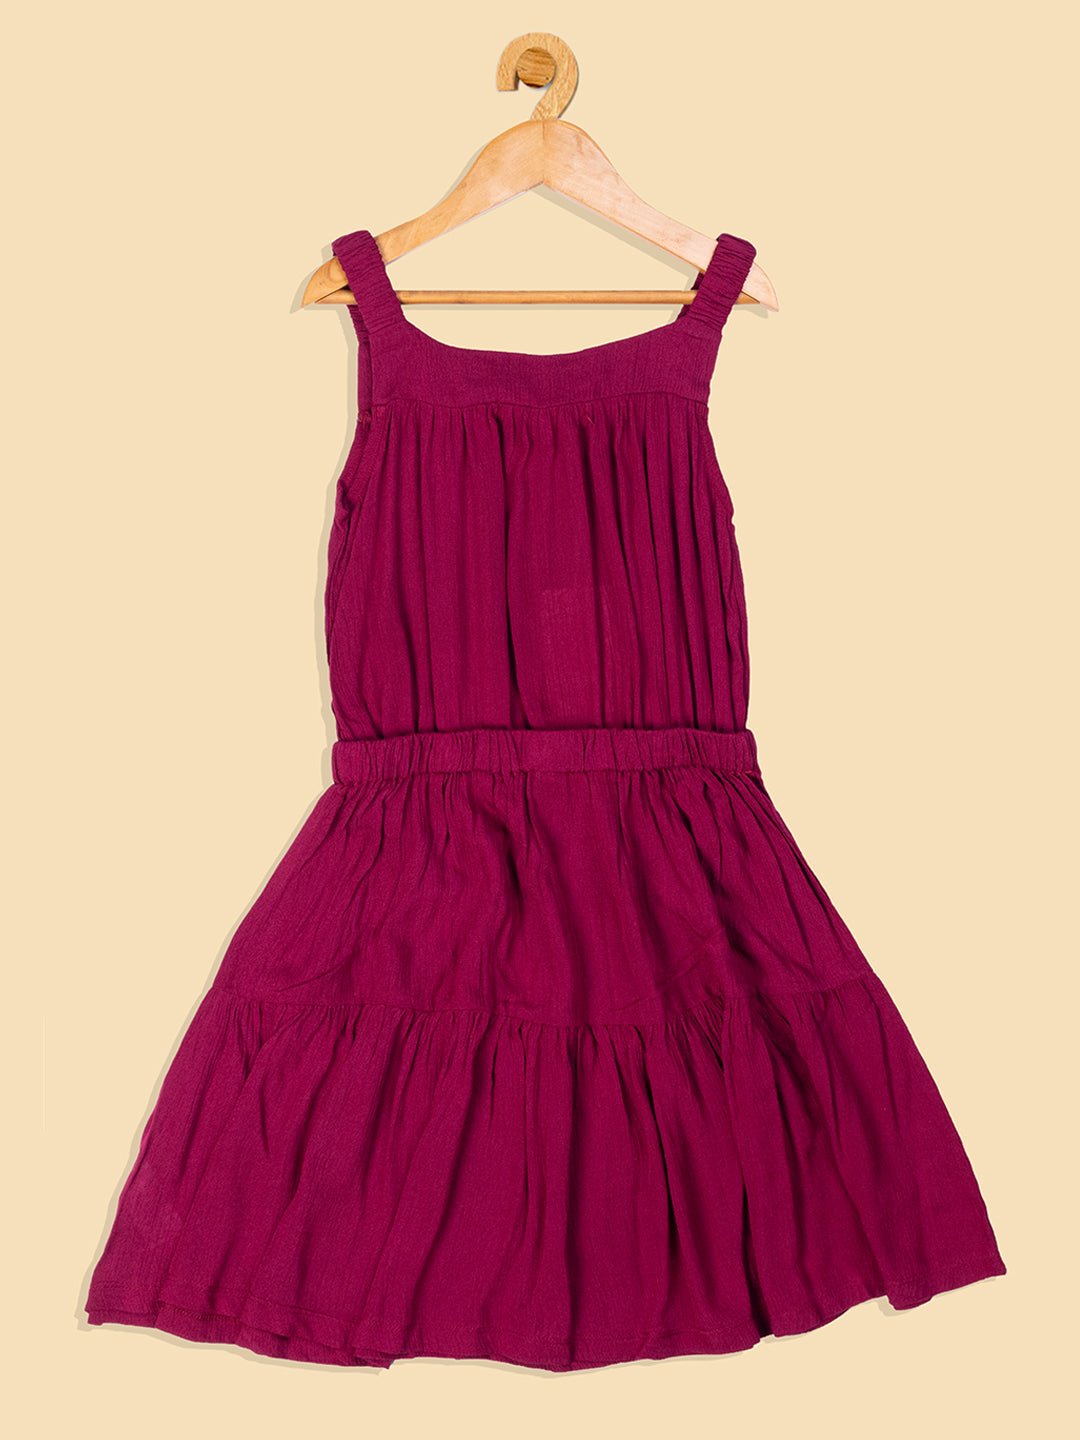 Pampolina Solid Summer Cotton Dress For Baby Girl With Elastic Belt -Wine